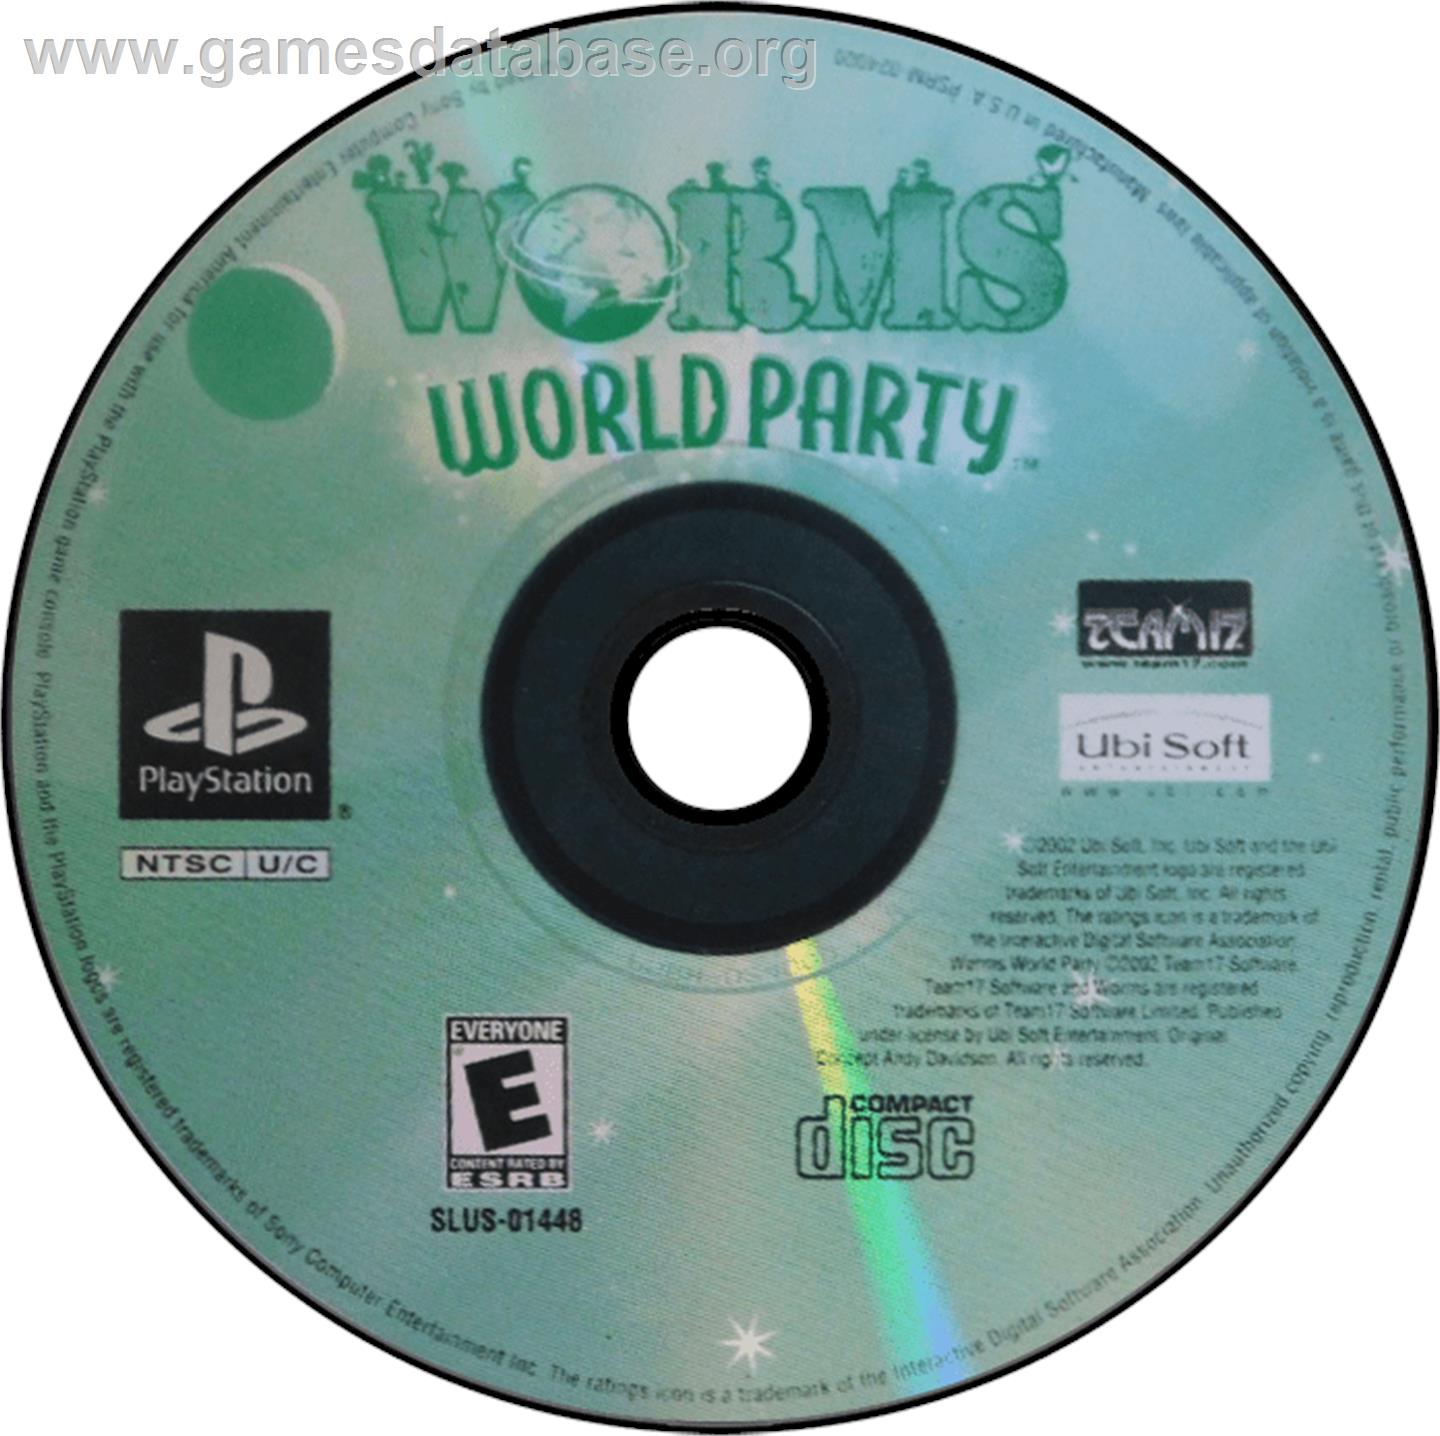 Worms World Party - Sony Playstation - Artwork - Disc